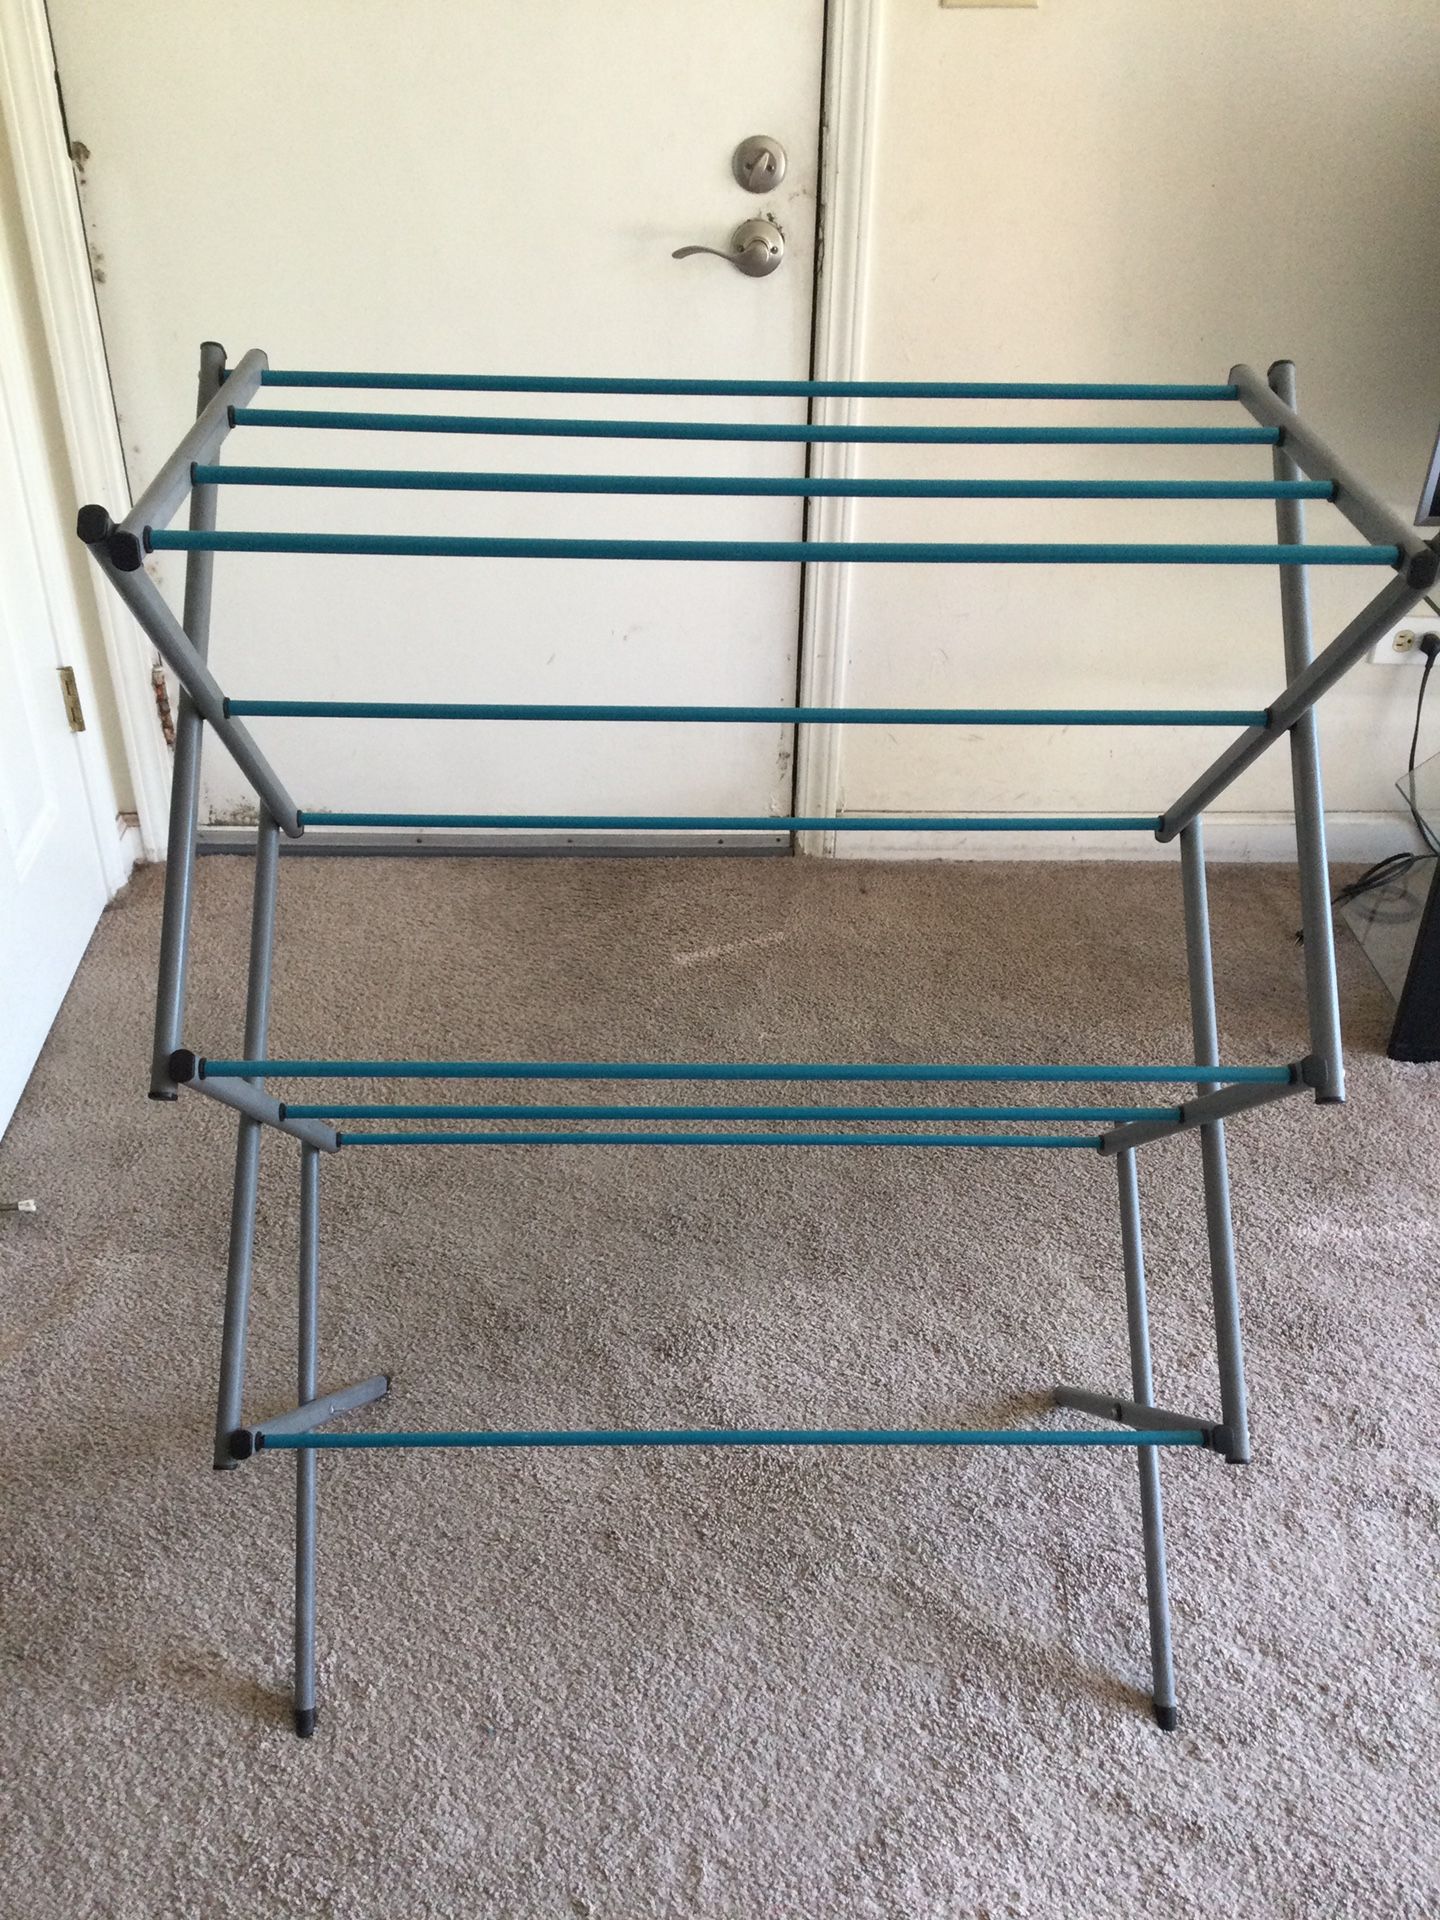 clothes drying rack